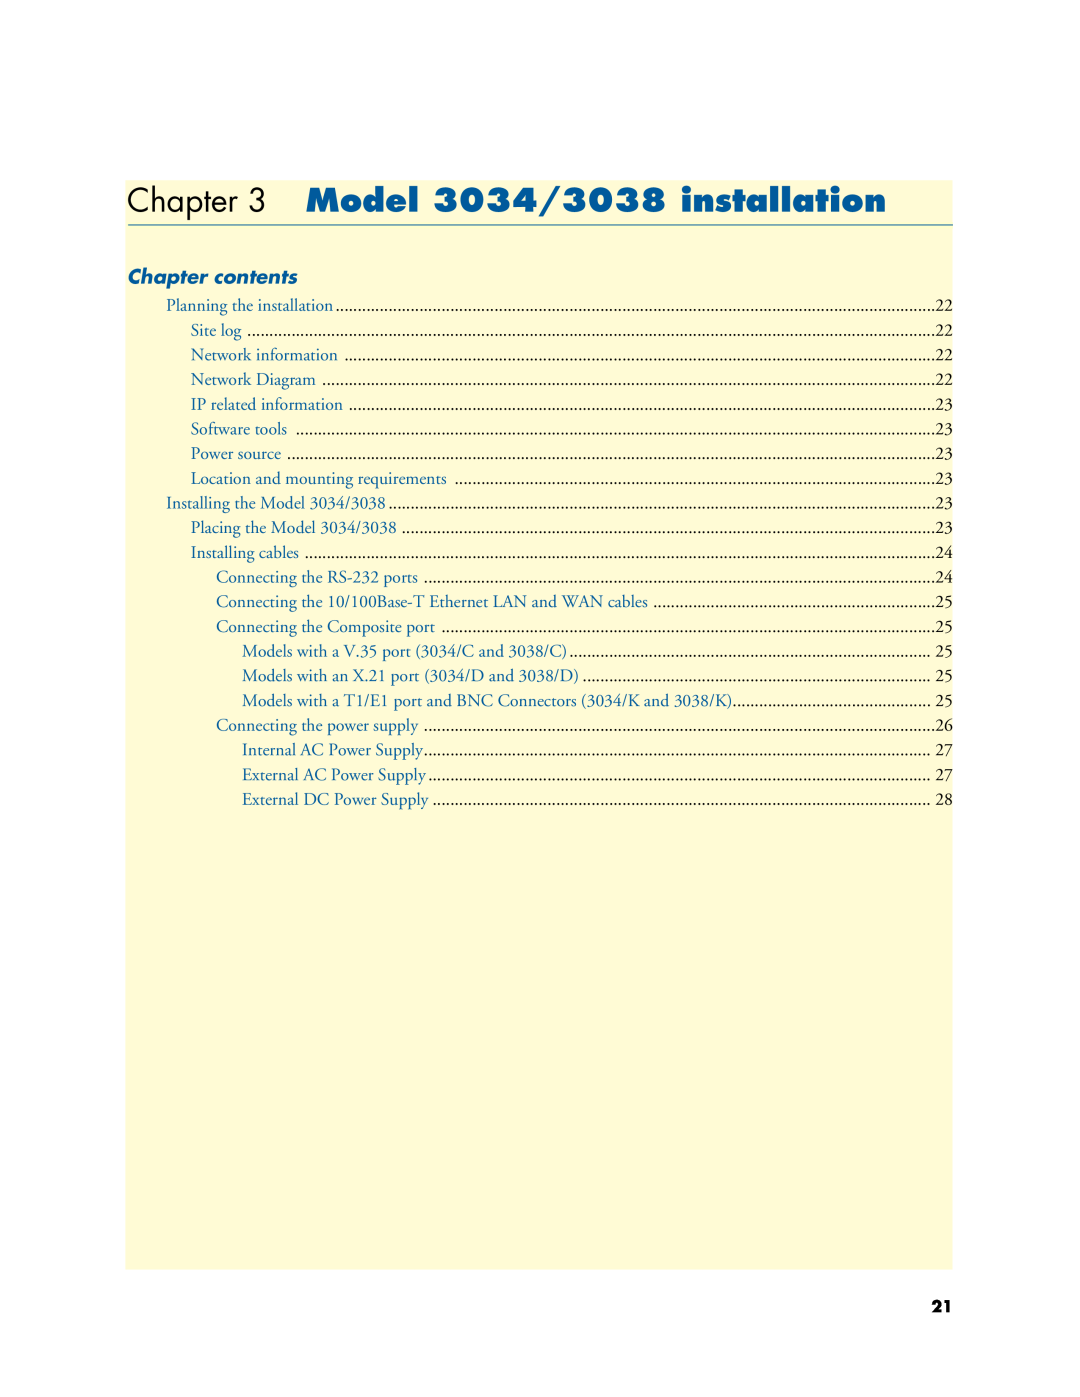 Patton electronic manual Model 3034/3038 installation, Chapter contents 